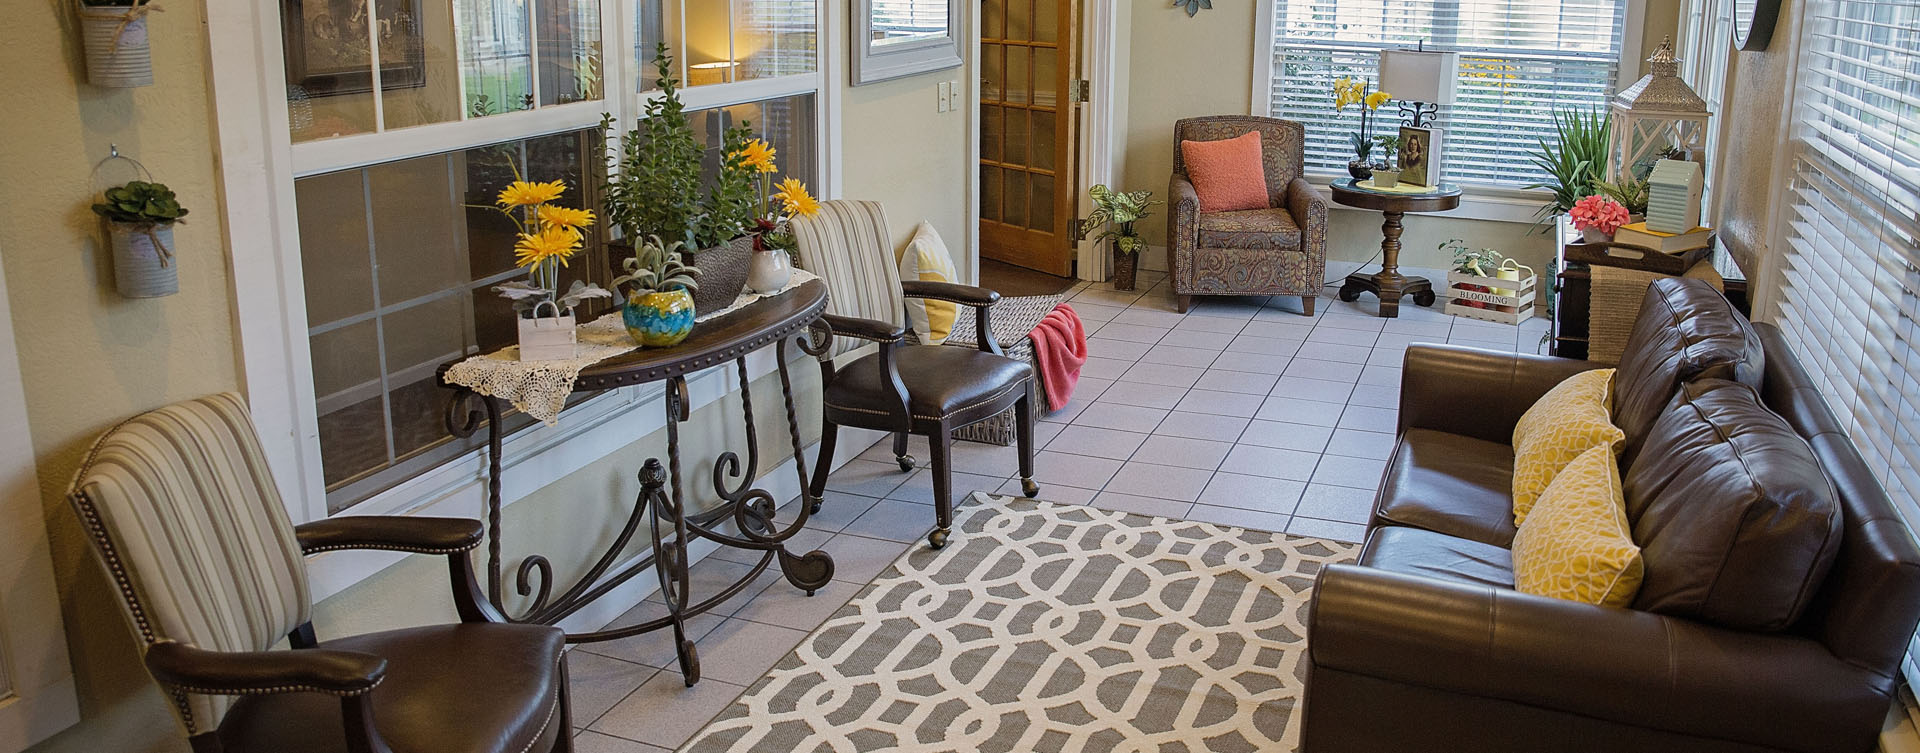 Relax in the warmth of the sunroom at Bickford of Grand Island